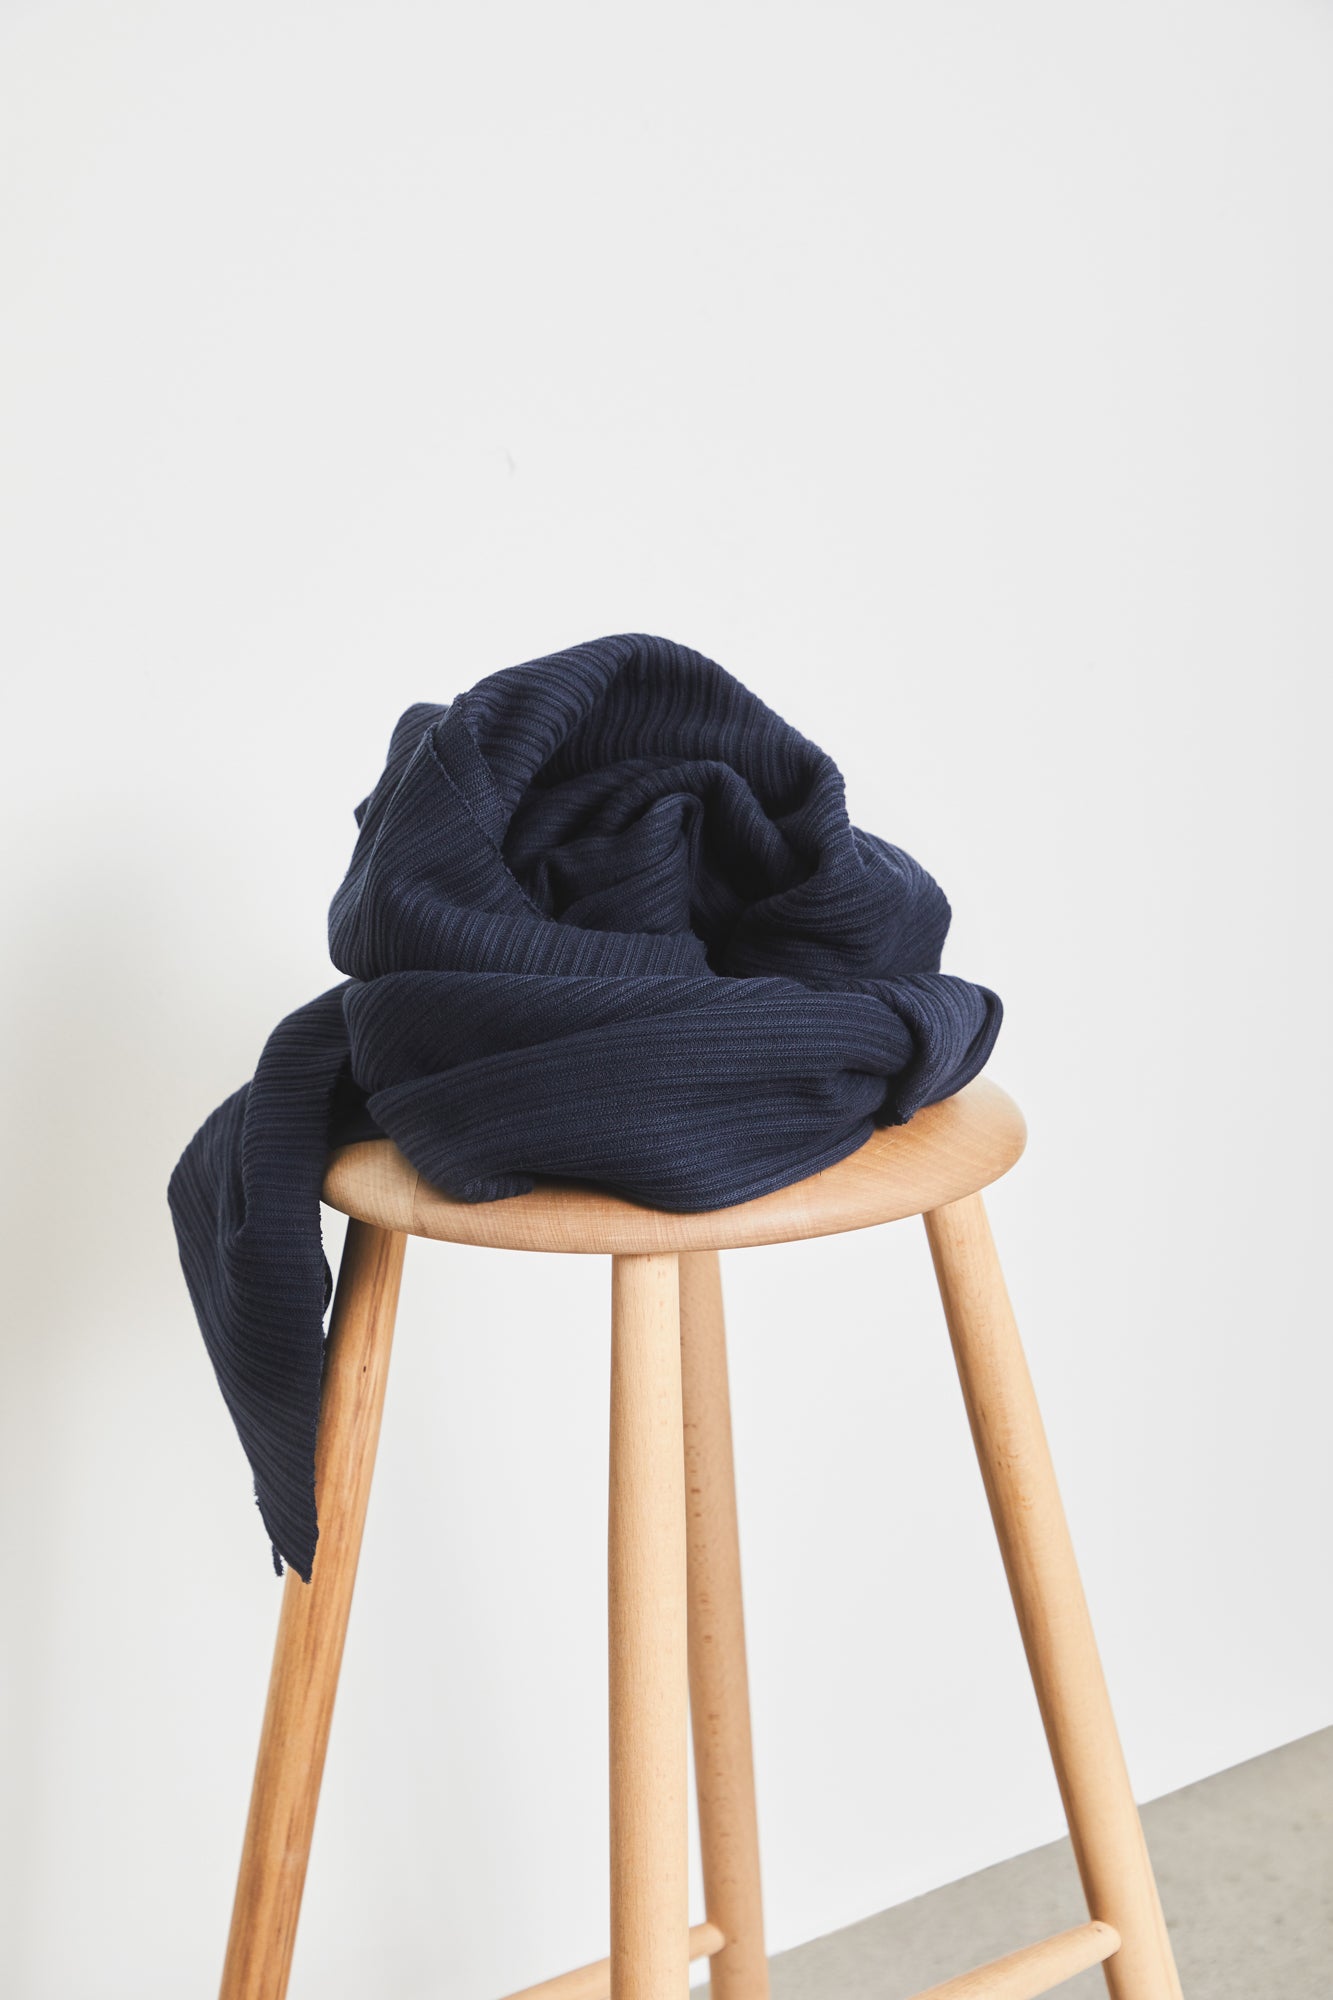 Chunky organic cotton ribbed knit sewing fabric in colour navy, piled on top of wooden stool